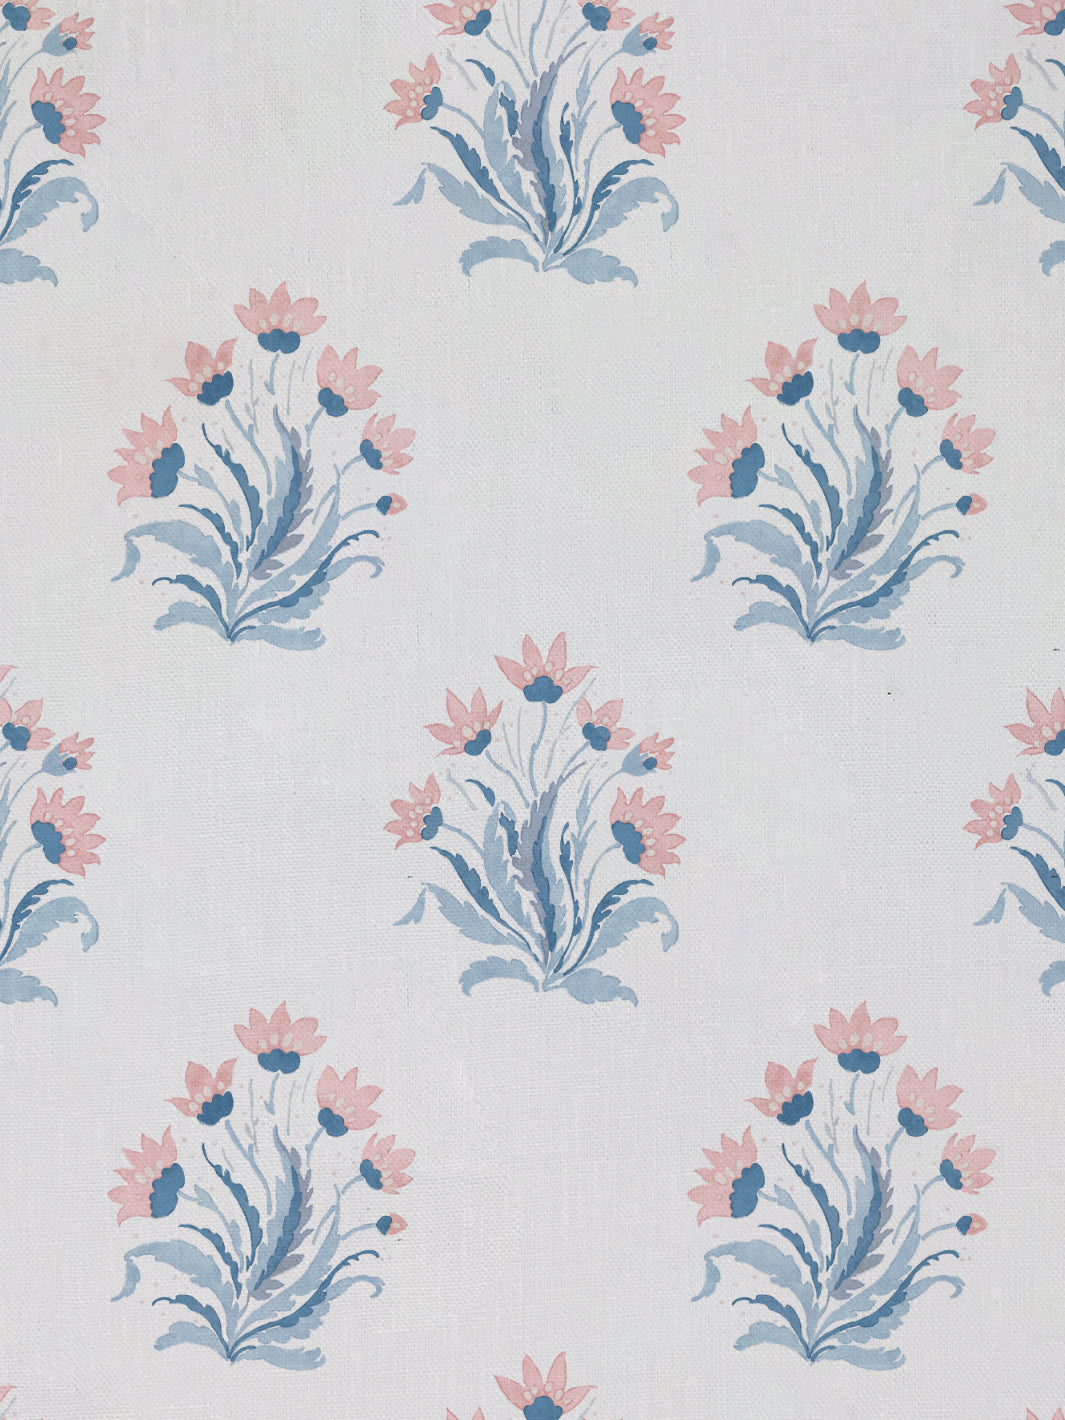 'Hillhouse Block Print Small' Linen Fabric by Nathan Turner - Pink Blue